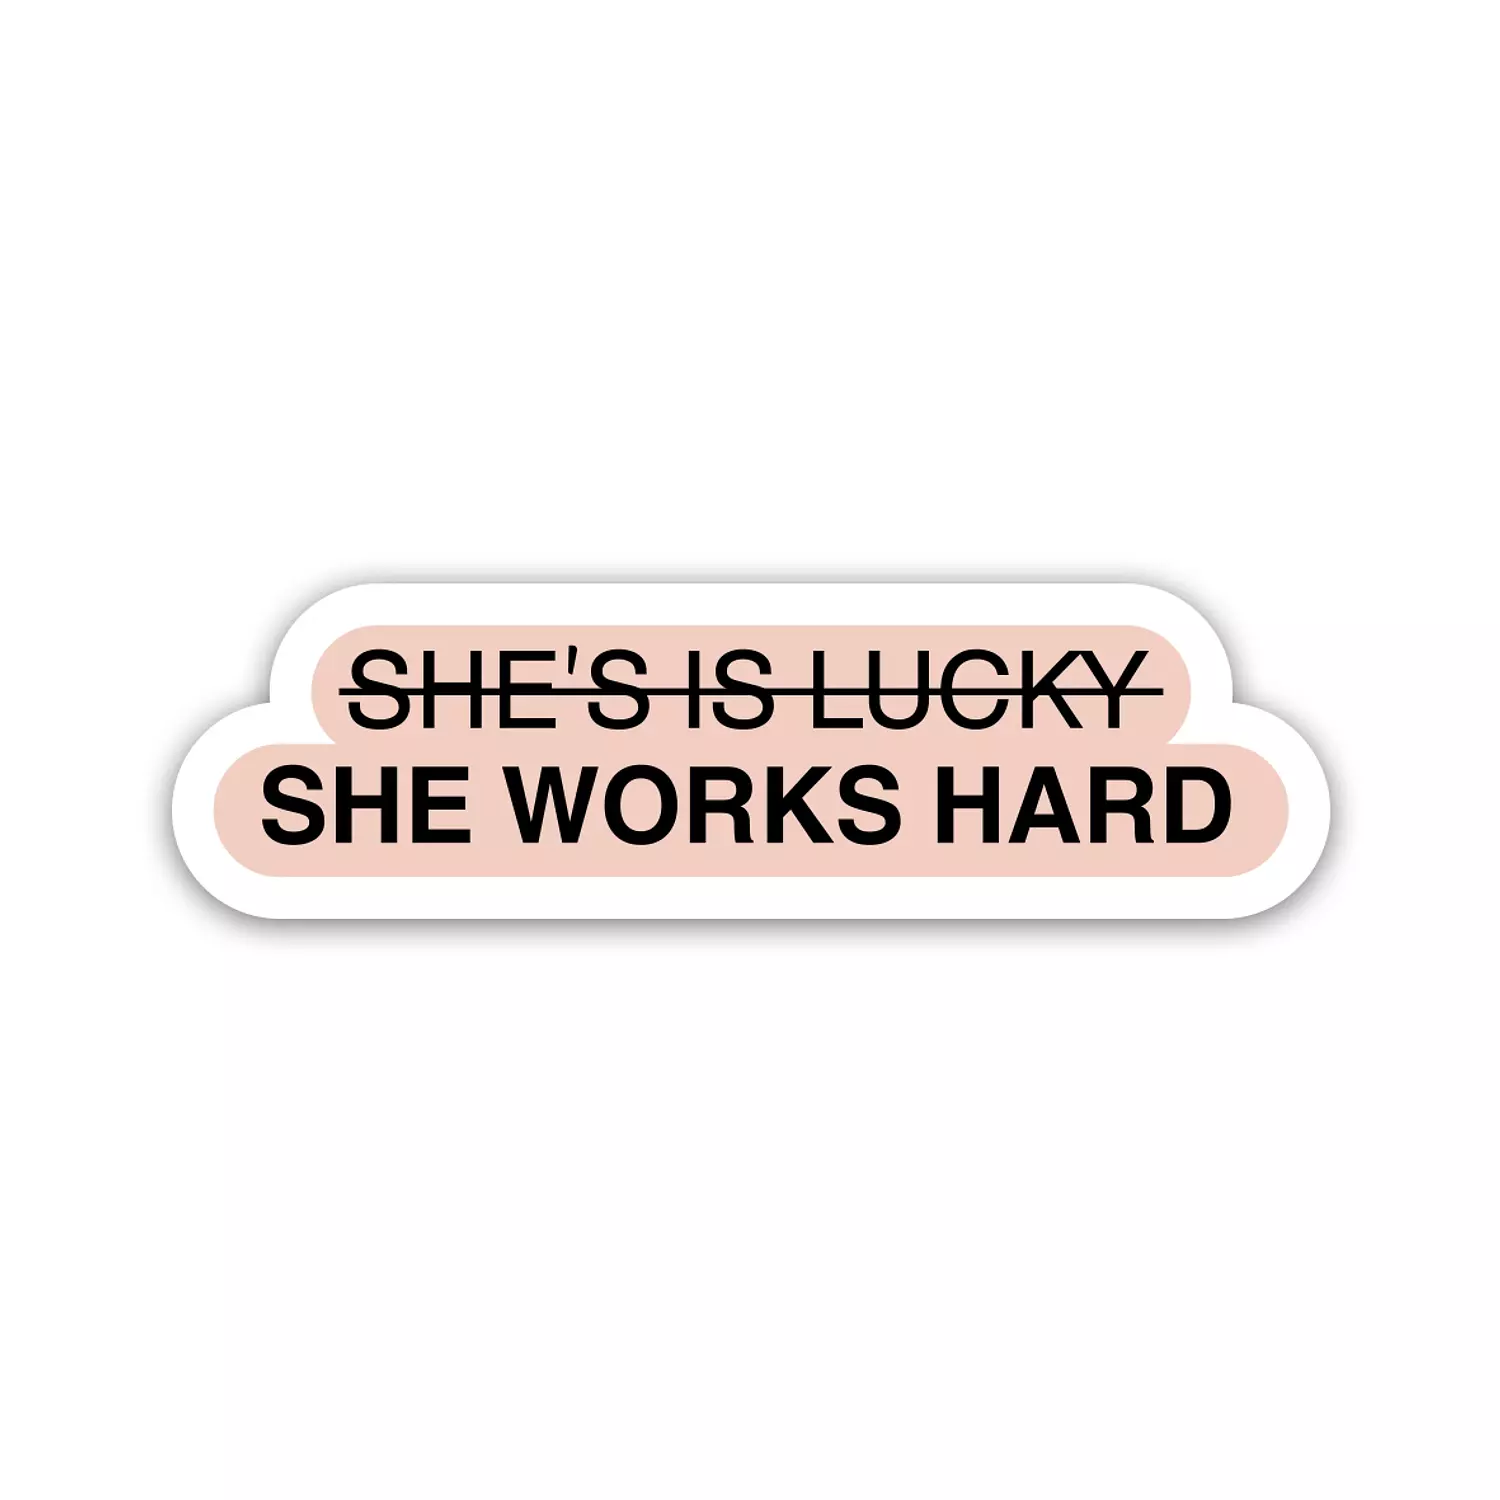 She Works Hard - Positive Quotes  hover image